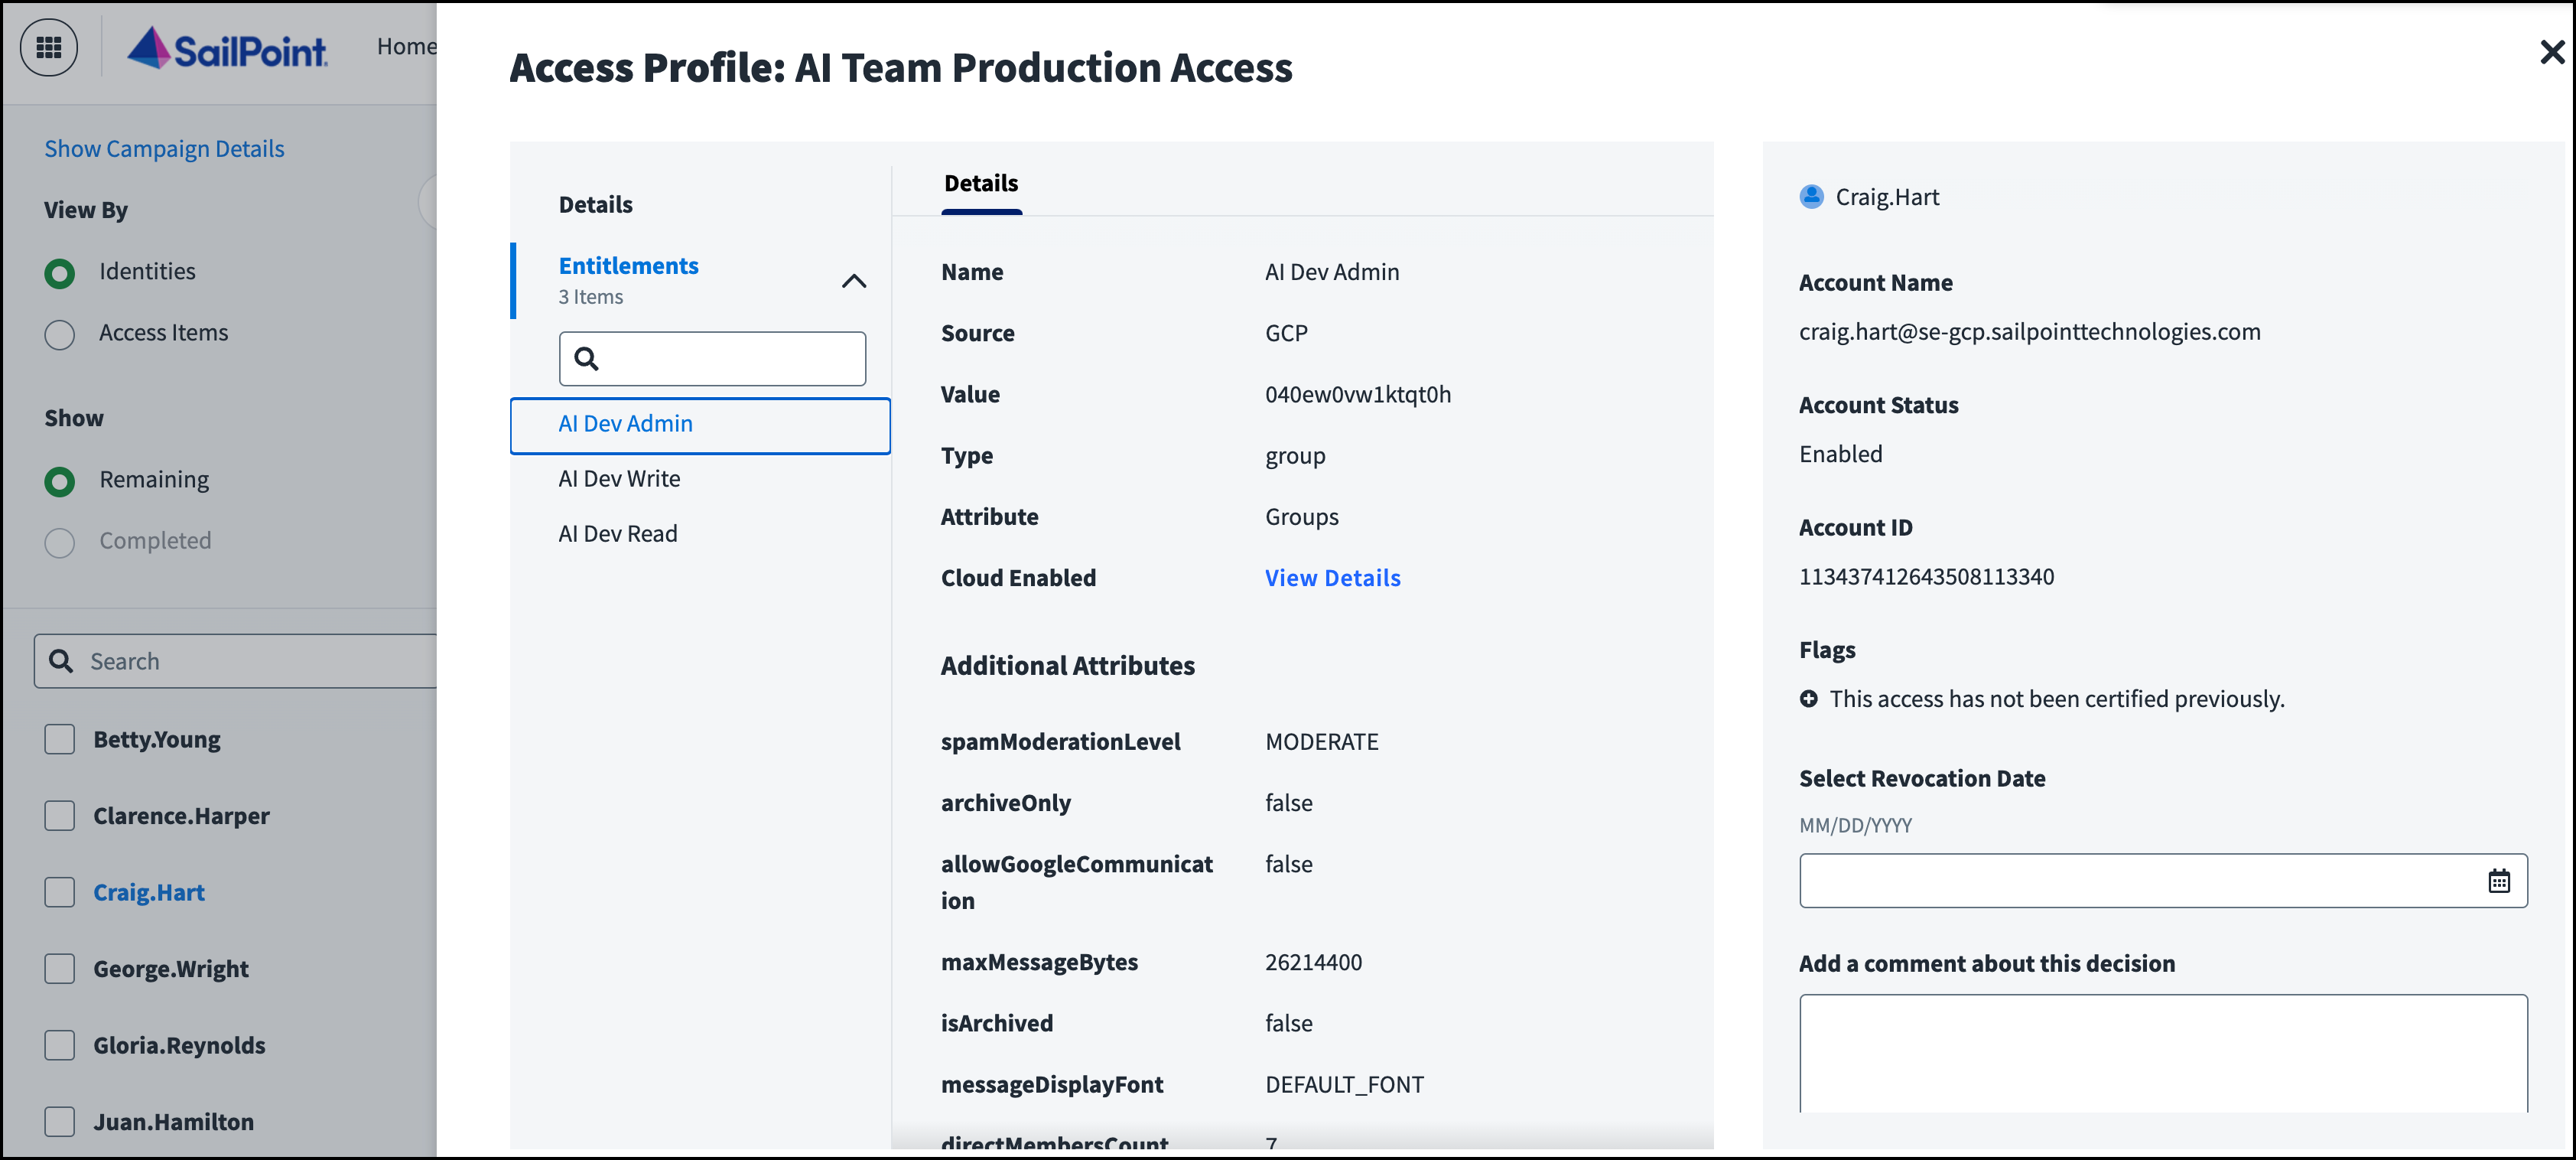 Details about the access profile are displayed with the All Dev Admin entitlement selected. The Cloud Enabled section includes a link to view cloud details.